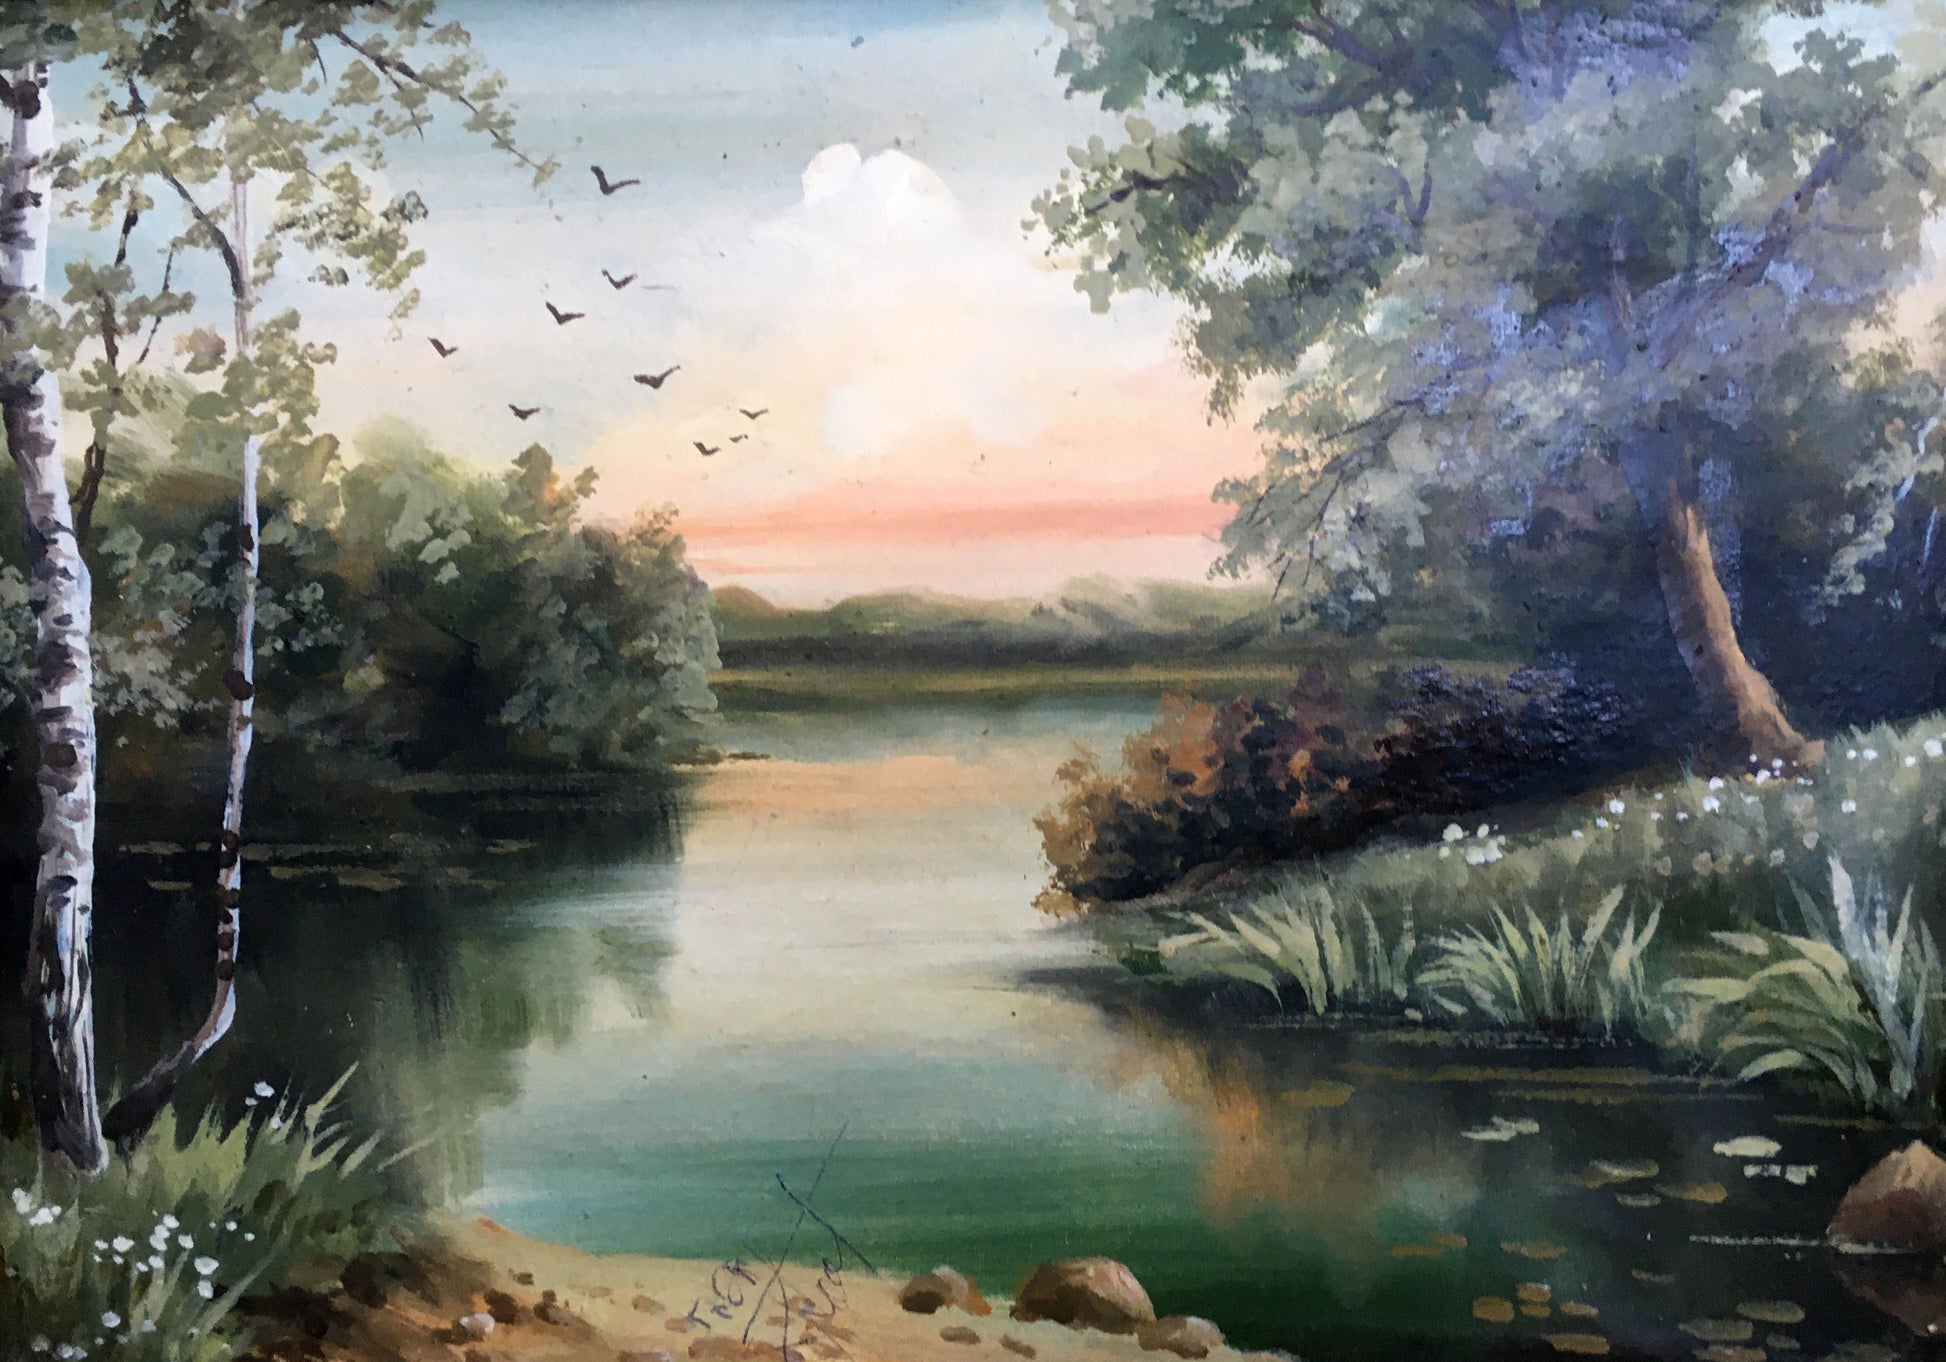 Boroshnev M.'s oil painting captures the essence of a serene summer day